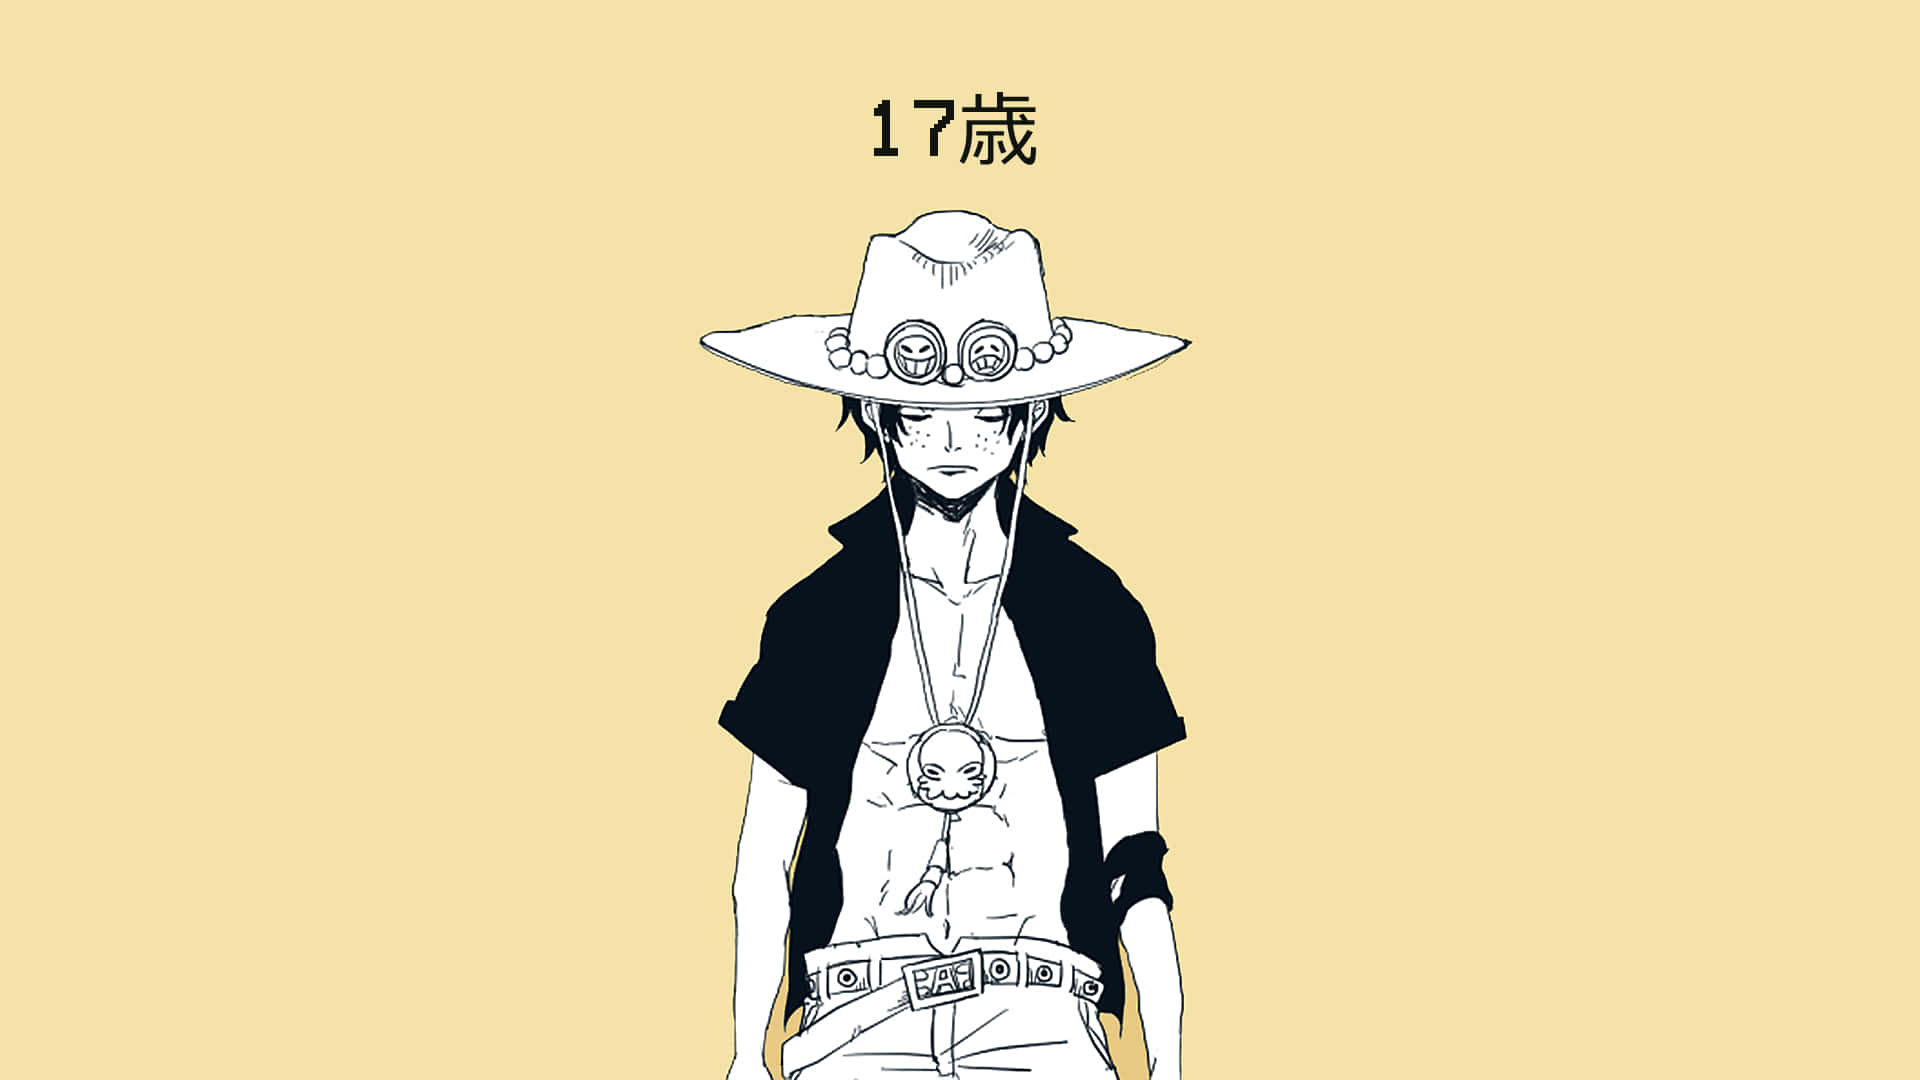 Portgas D Ace, The Captain Of The Whitebeard Pirates Background